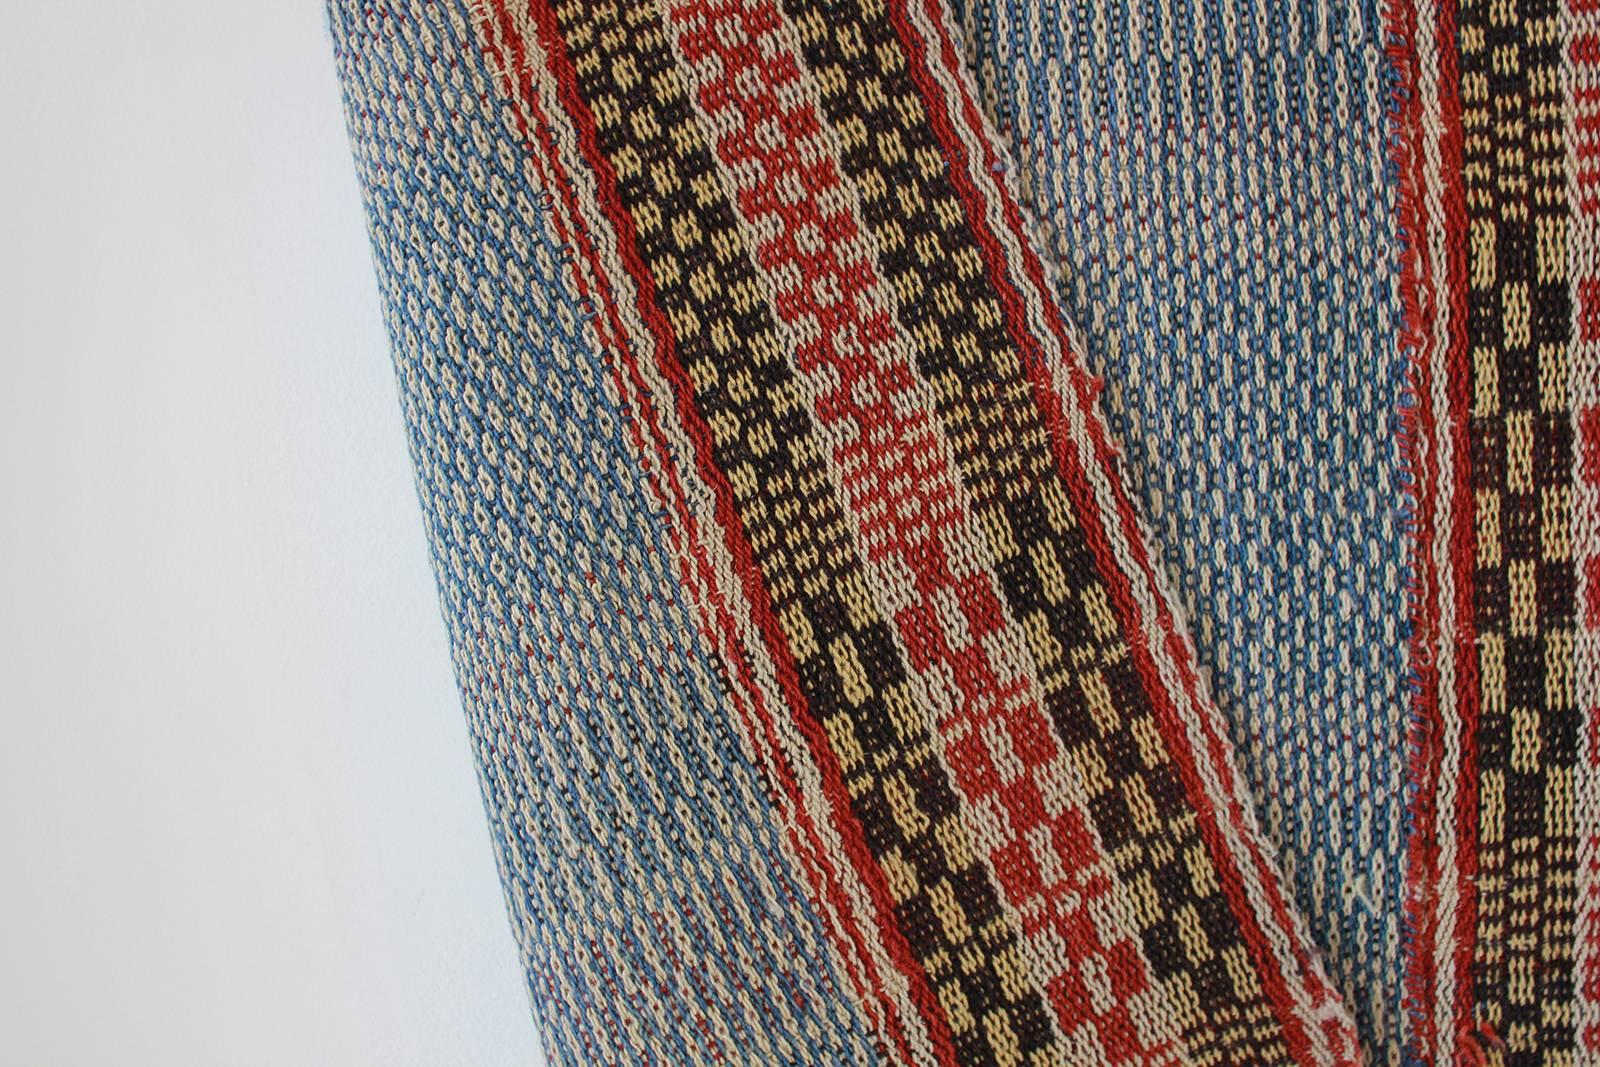 Multicolored Chinese woven rug with blue and red stripes.